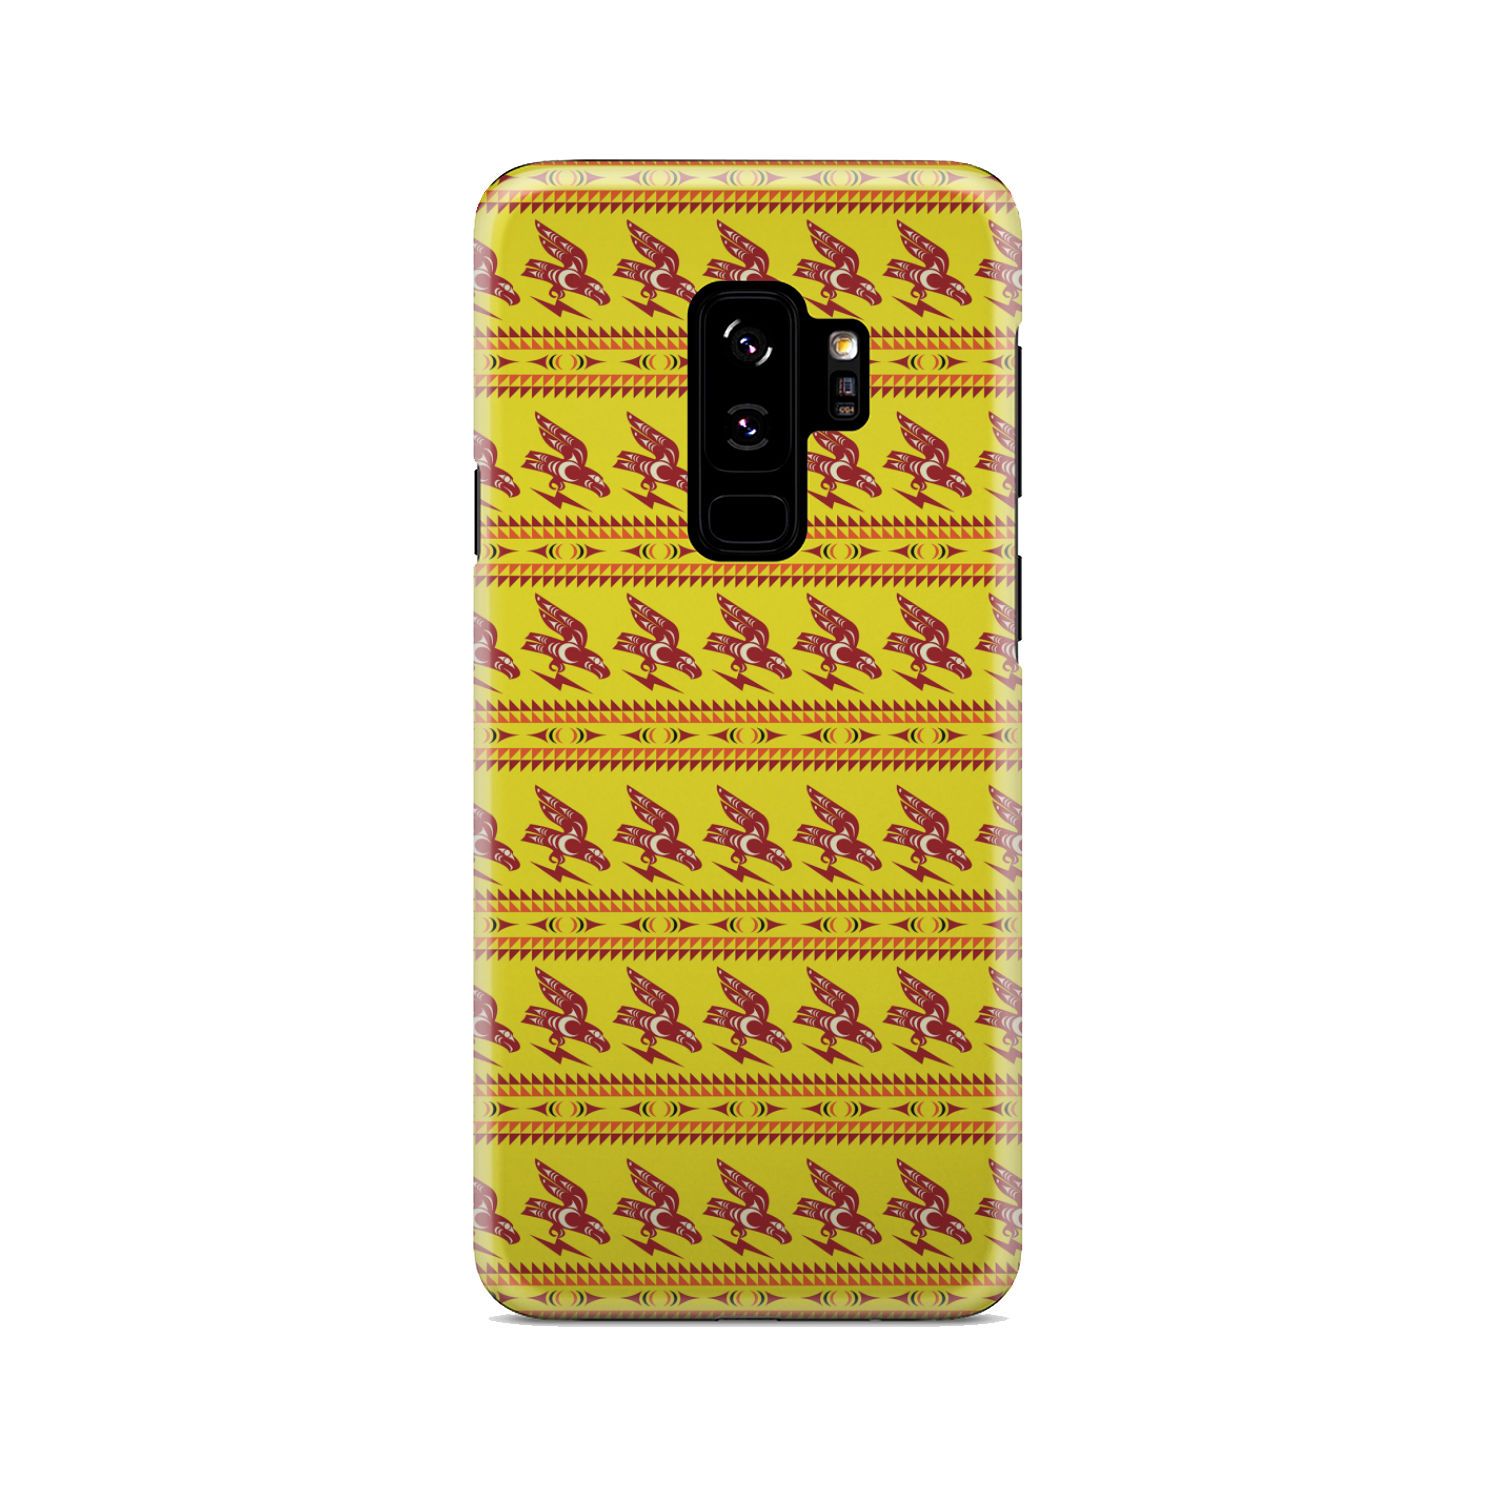 Ovila Mailhot Design : Eagle Brings Good Vibes Yellow Phone Case Phone Case wc-fulfillment Samsung Galaxy S9 Plus 